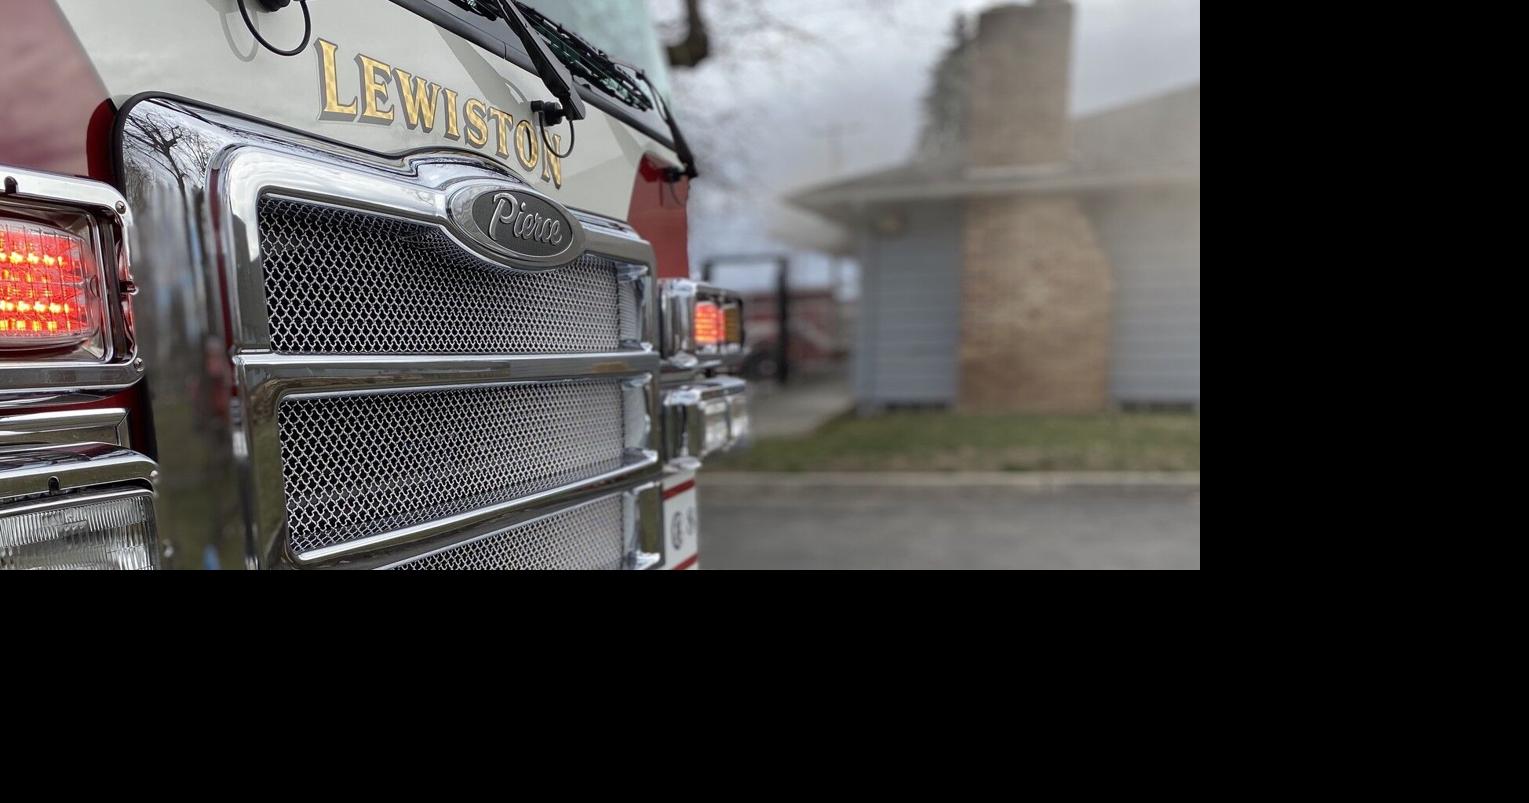 Lewiston structure fire causes $50,000 in damages Christmas morning